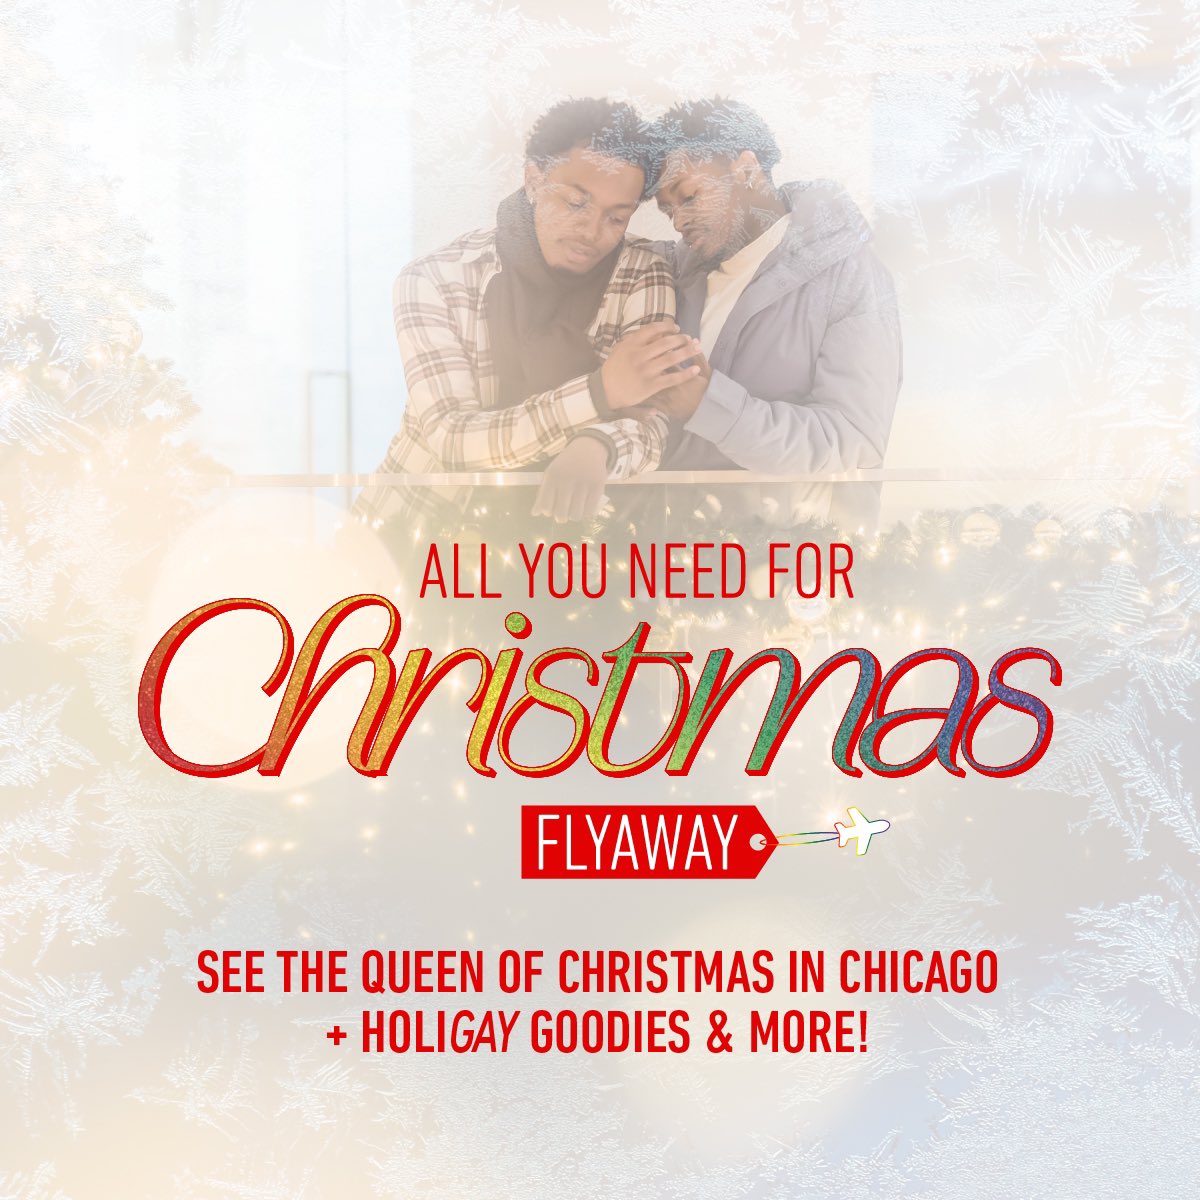 Happy HoliGays! 🎁✨ Enter to win the All You Need For Christmas Flyaway – free tix to see @MariahCarey in Chicago on 12/3 + travel fare + stay at #AloftChicagoMagMile + goodies from @ReplayLakeview @ReplayAville @ElixirAville @HydrateChicago and more! 🤩